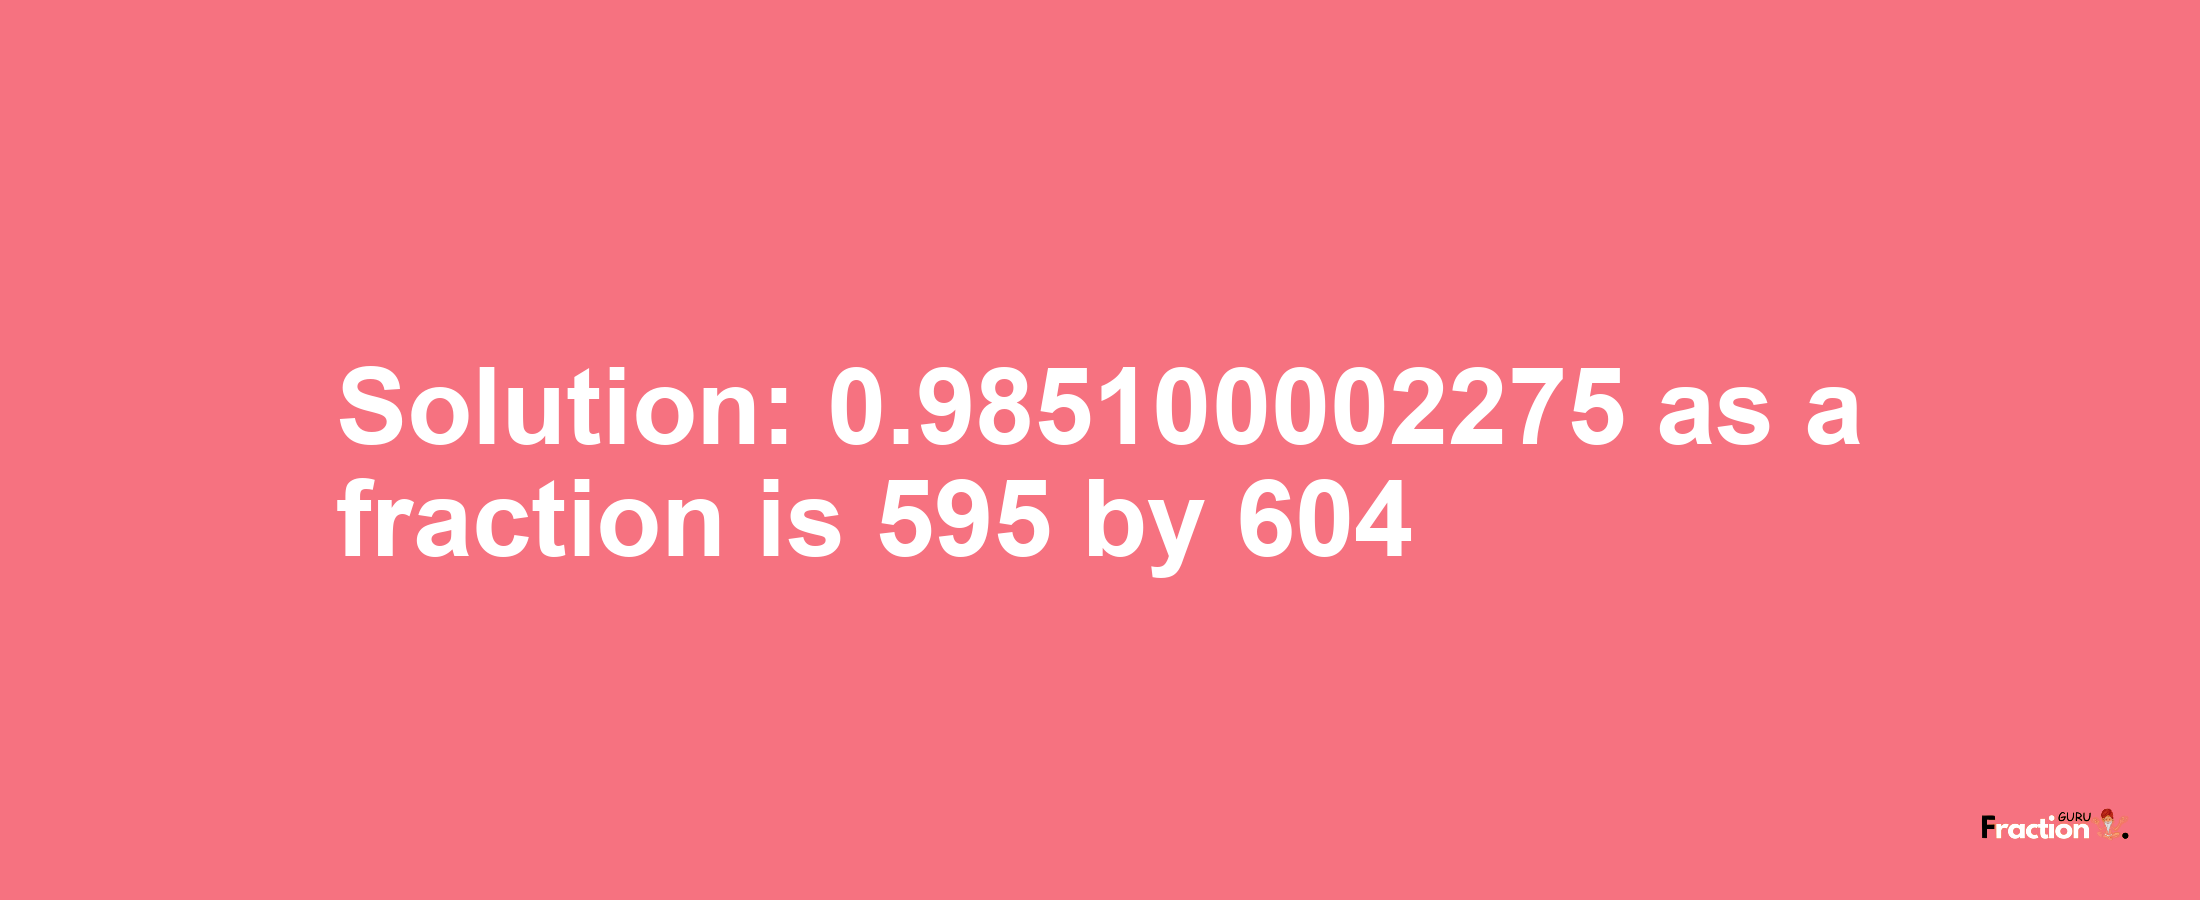 Solution:0.985100002275 as a fraction is 595/604